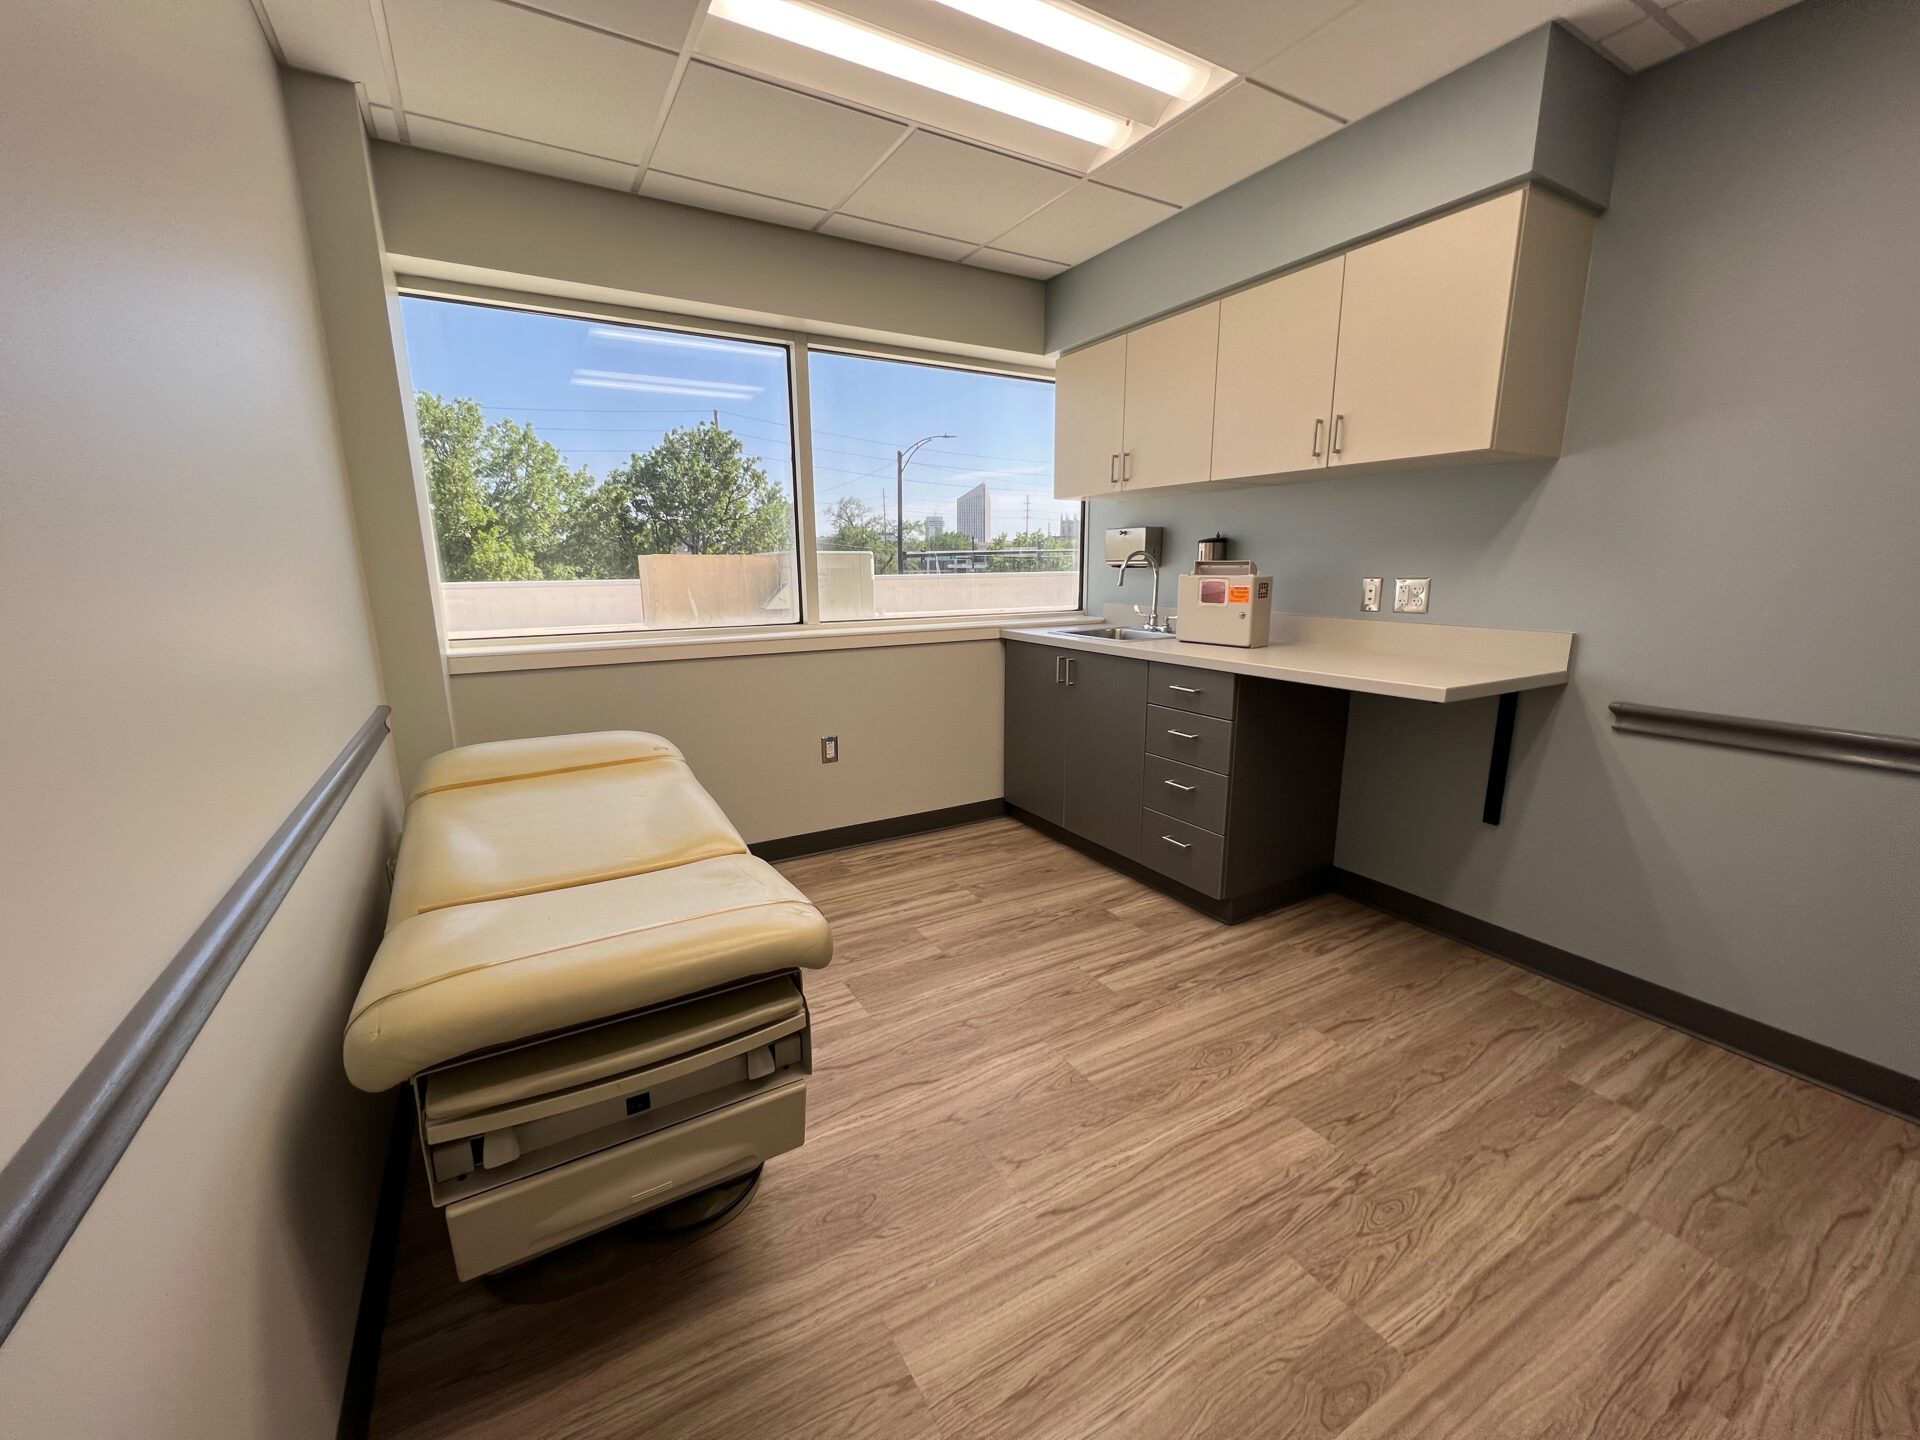 Exam room with a bed, counter space, and a sink.